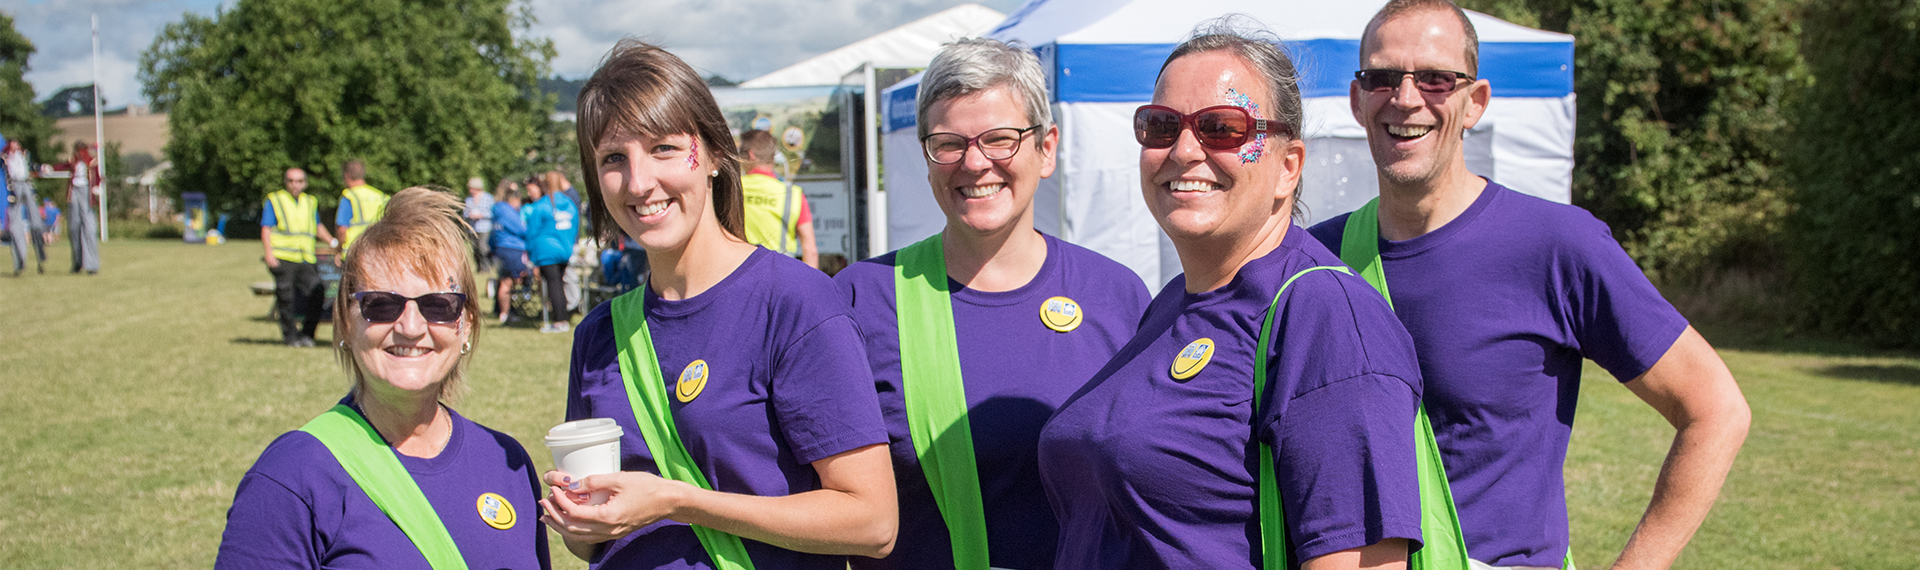 Our people; Team NDH at Customer Summer Fayre; purple tee shirts and green sashes